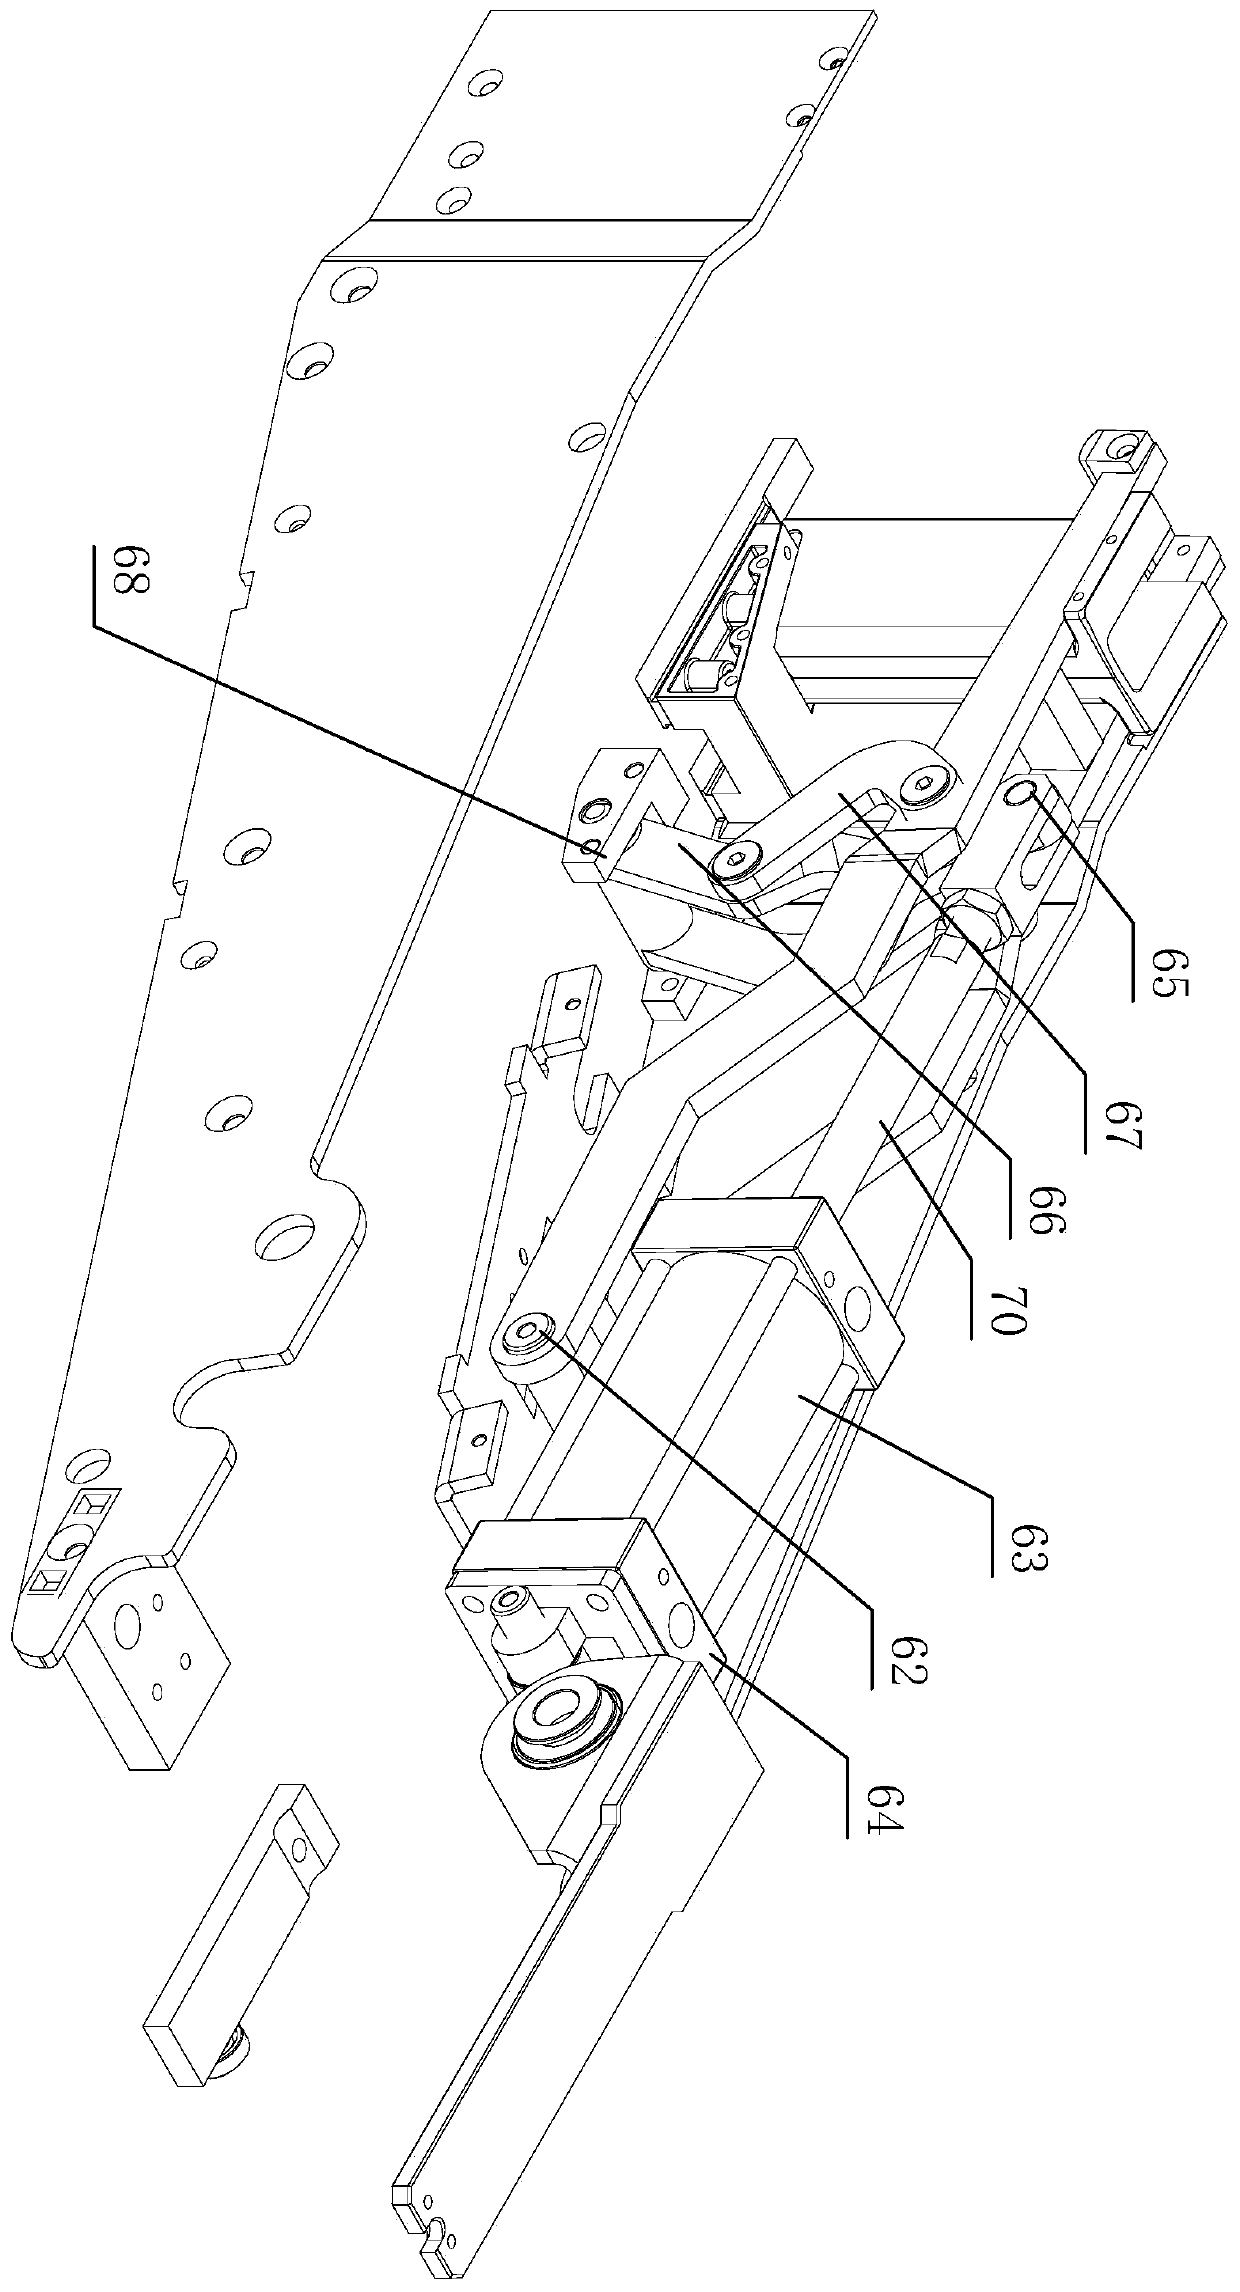 Control system and working method of computer panel saw